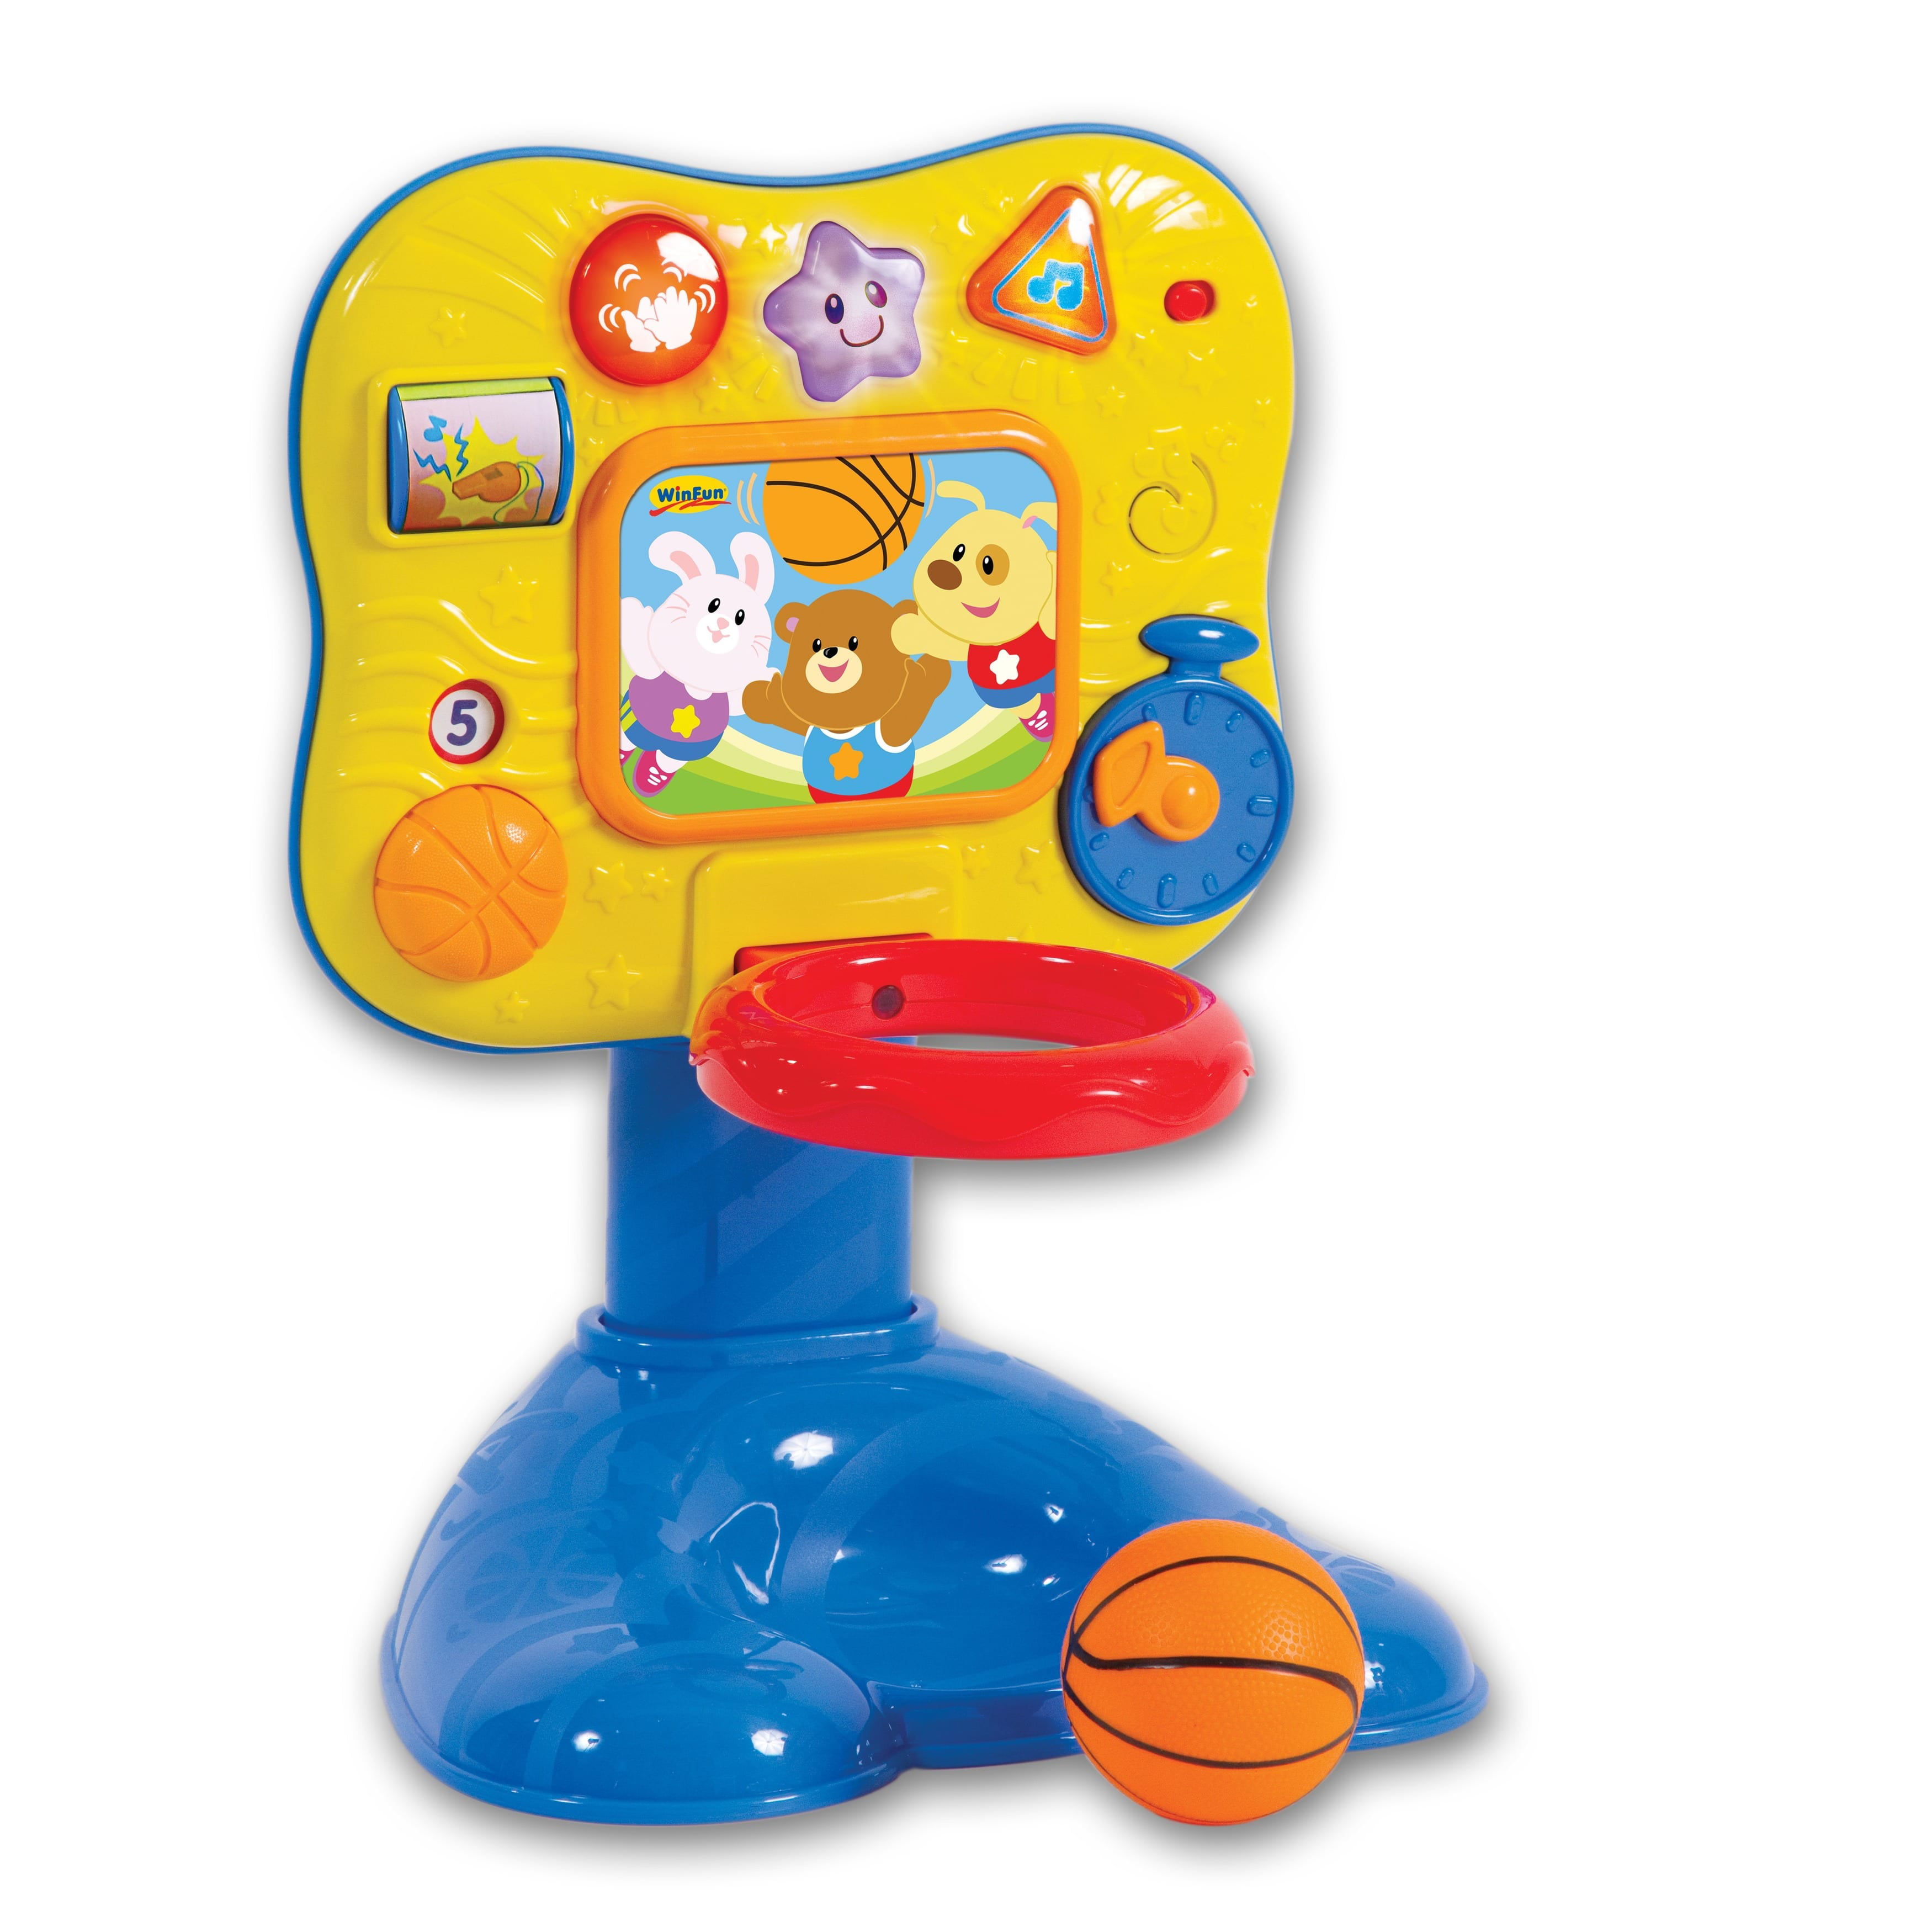 SHOOT BABY BASKETBALL FUN TOY PLAY SOUNDS LIGHT UP GIFT LEARNING ACTIVITY 18M 